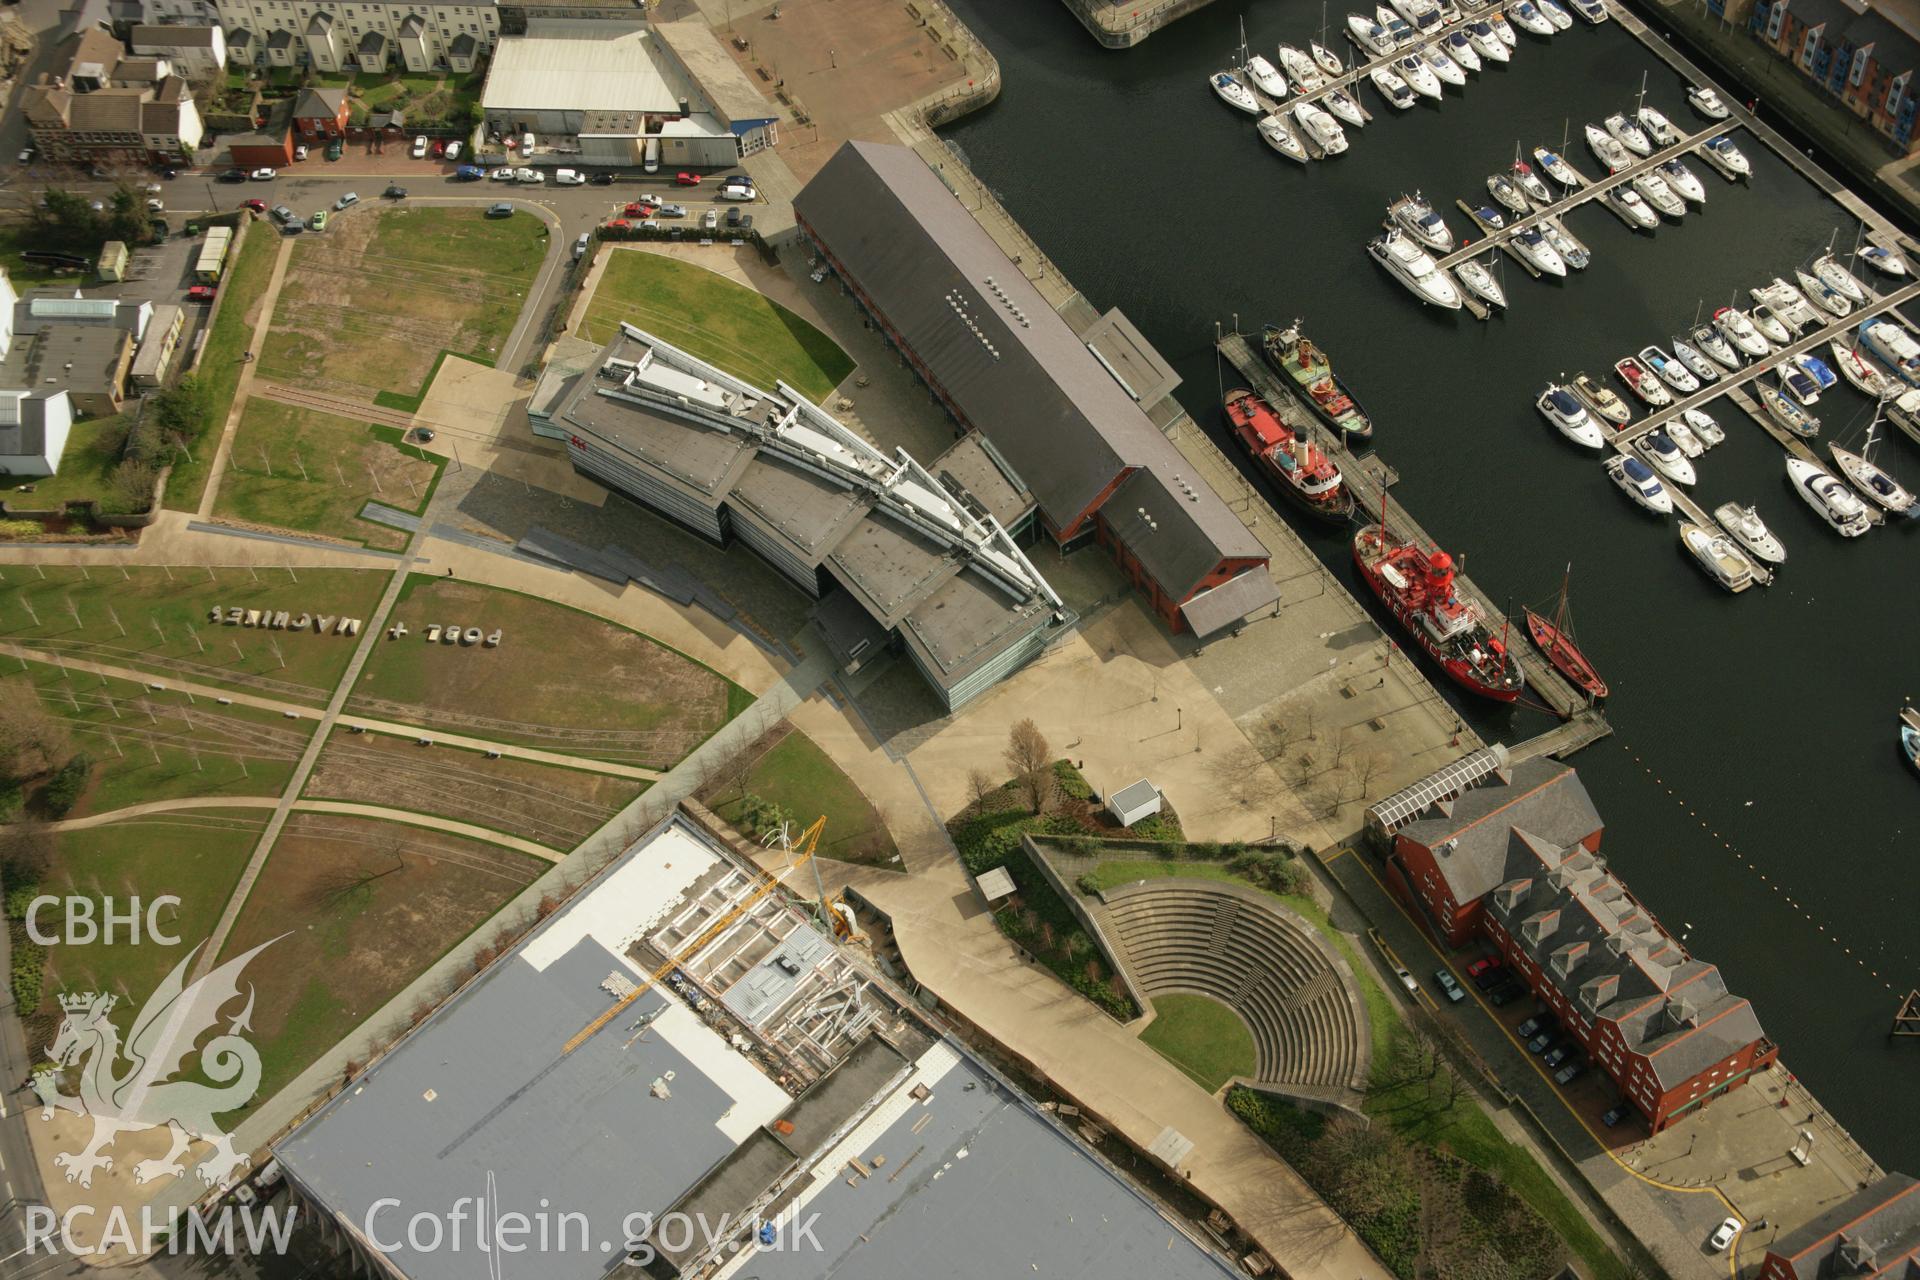 RCAHMW colour oblique aerial photograph of National Waterfront Museum, Swansea. Taken on 16 March 2007 by Toby Driver